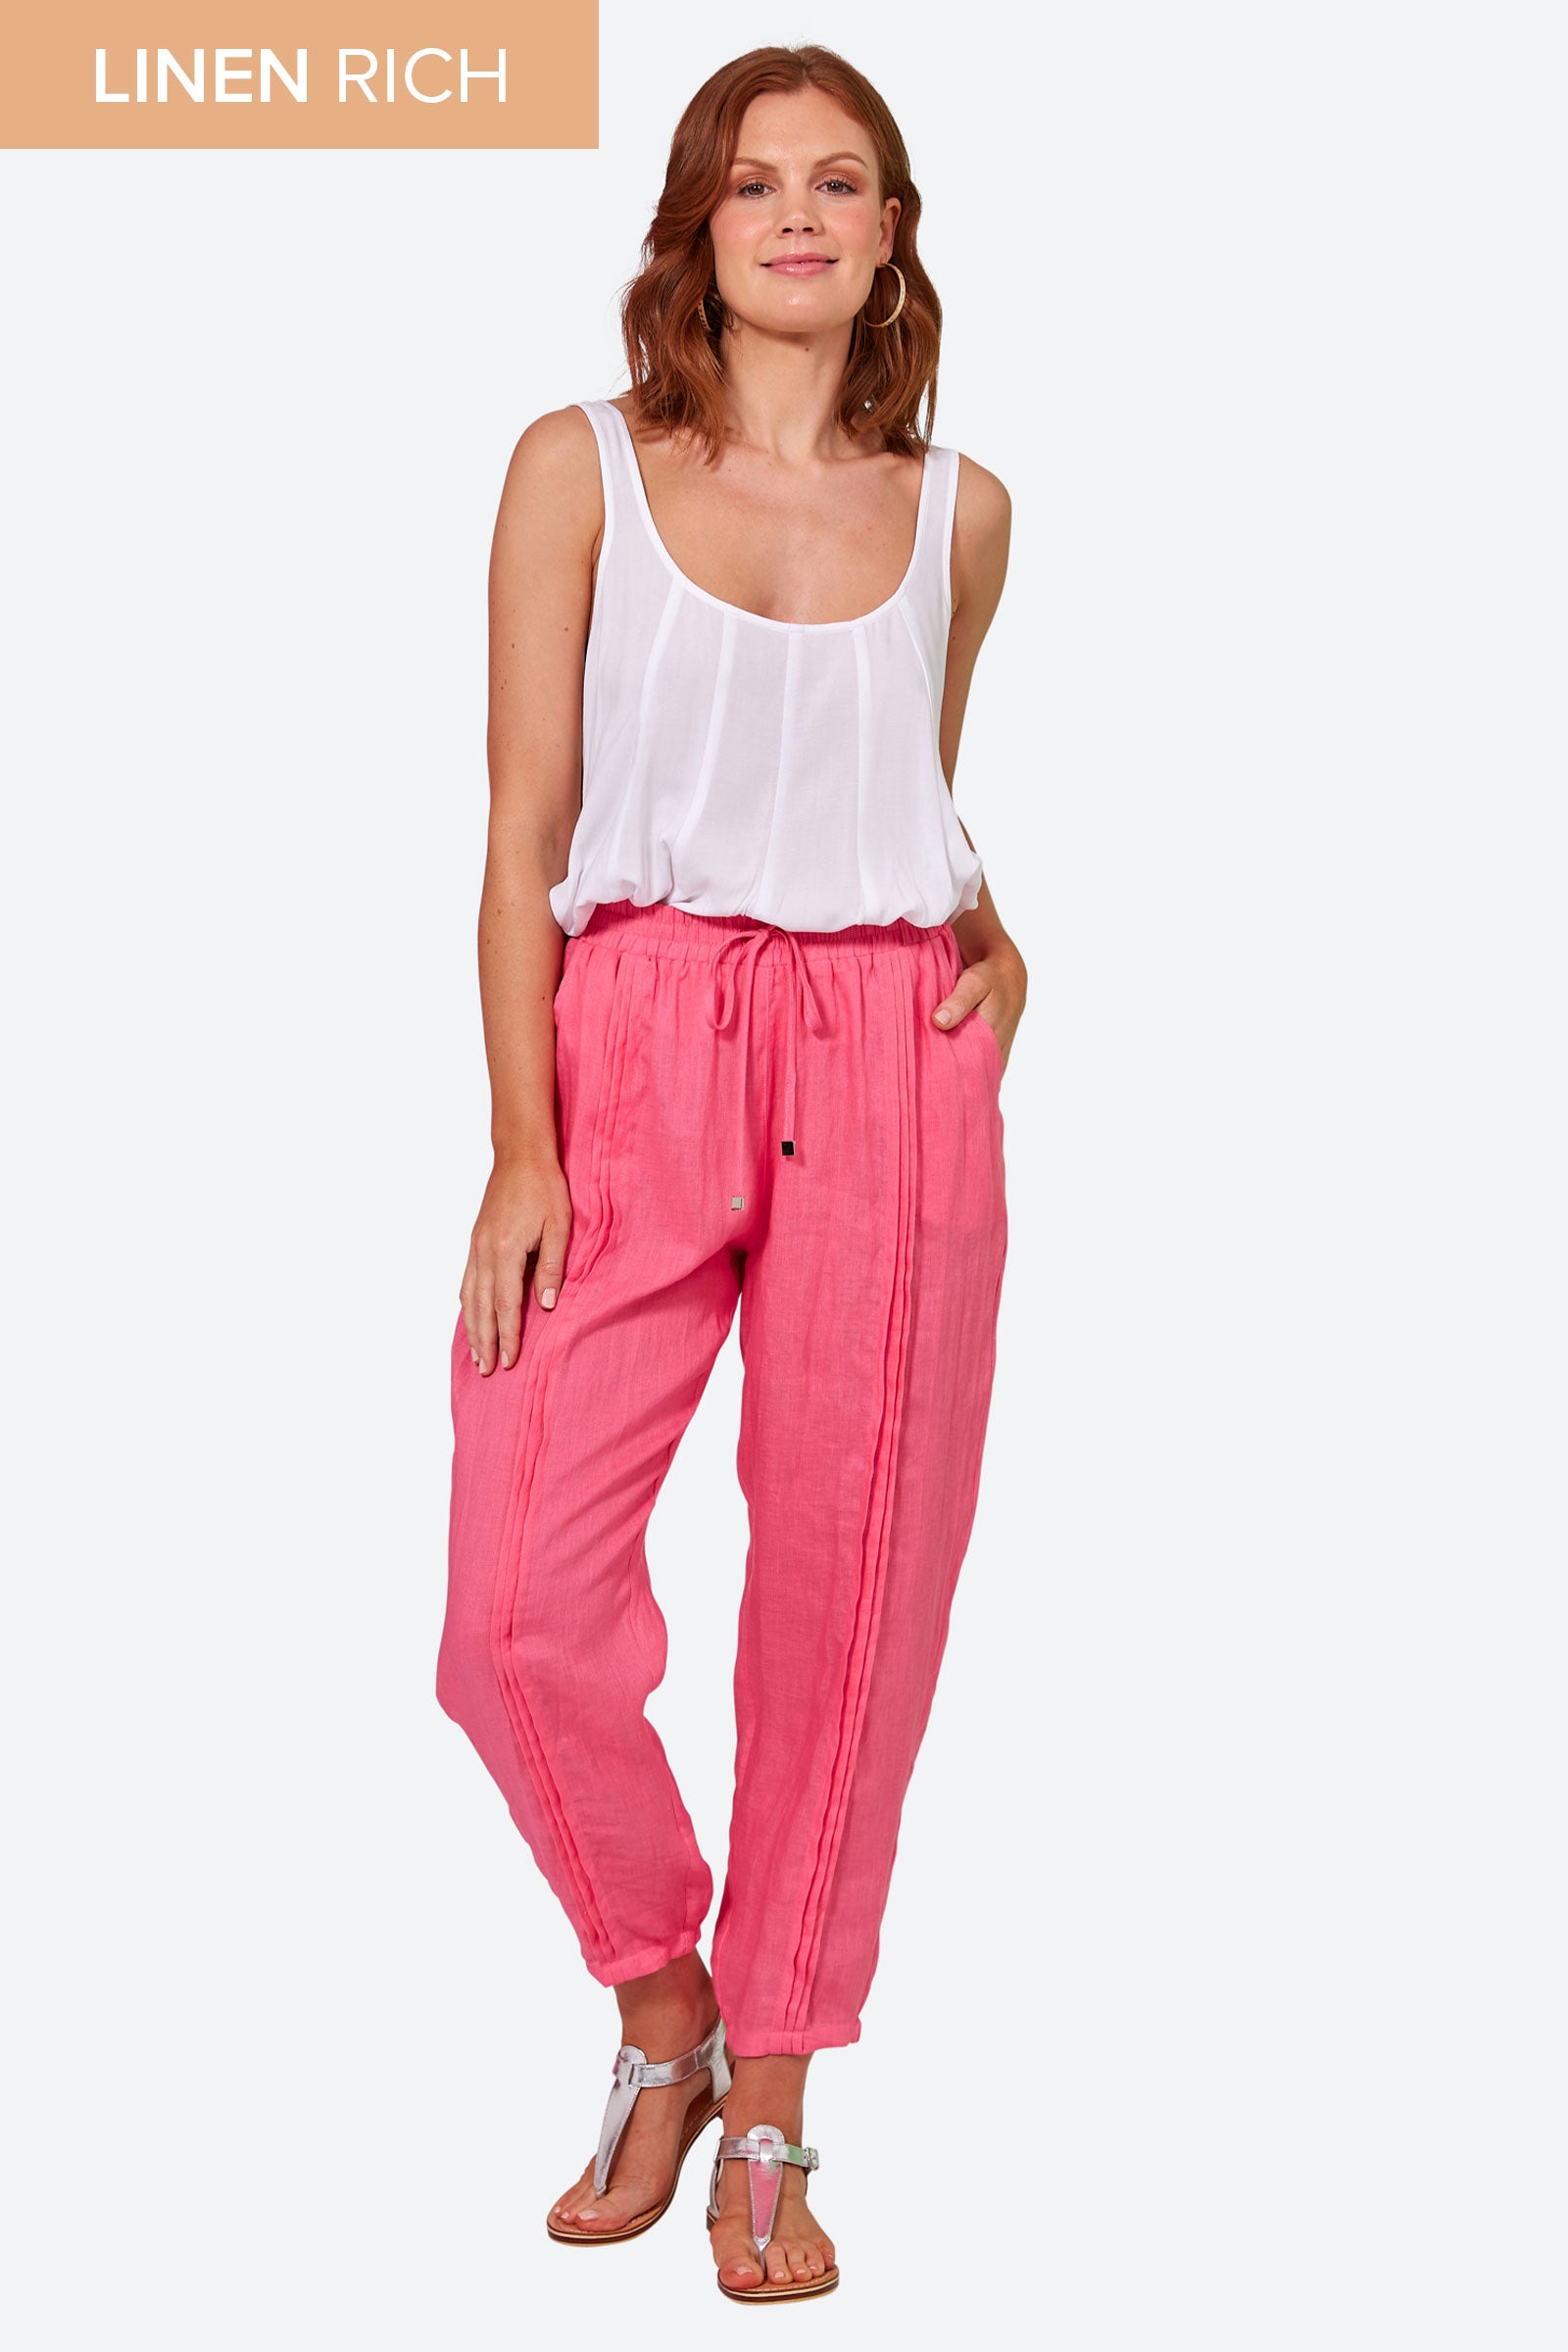 La Vie Pintuck Pant - Candy - eb&ive Clothing - Pant Relaxed Linen